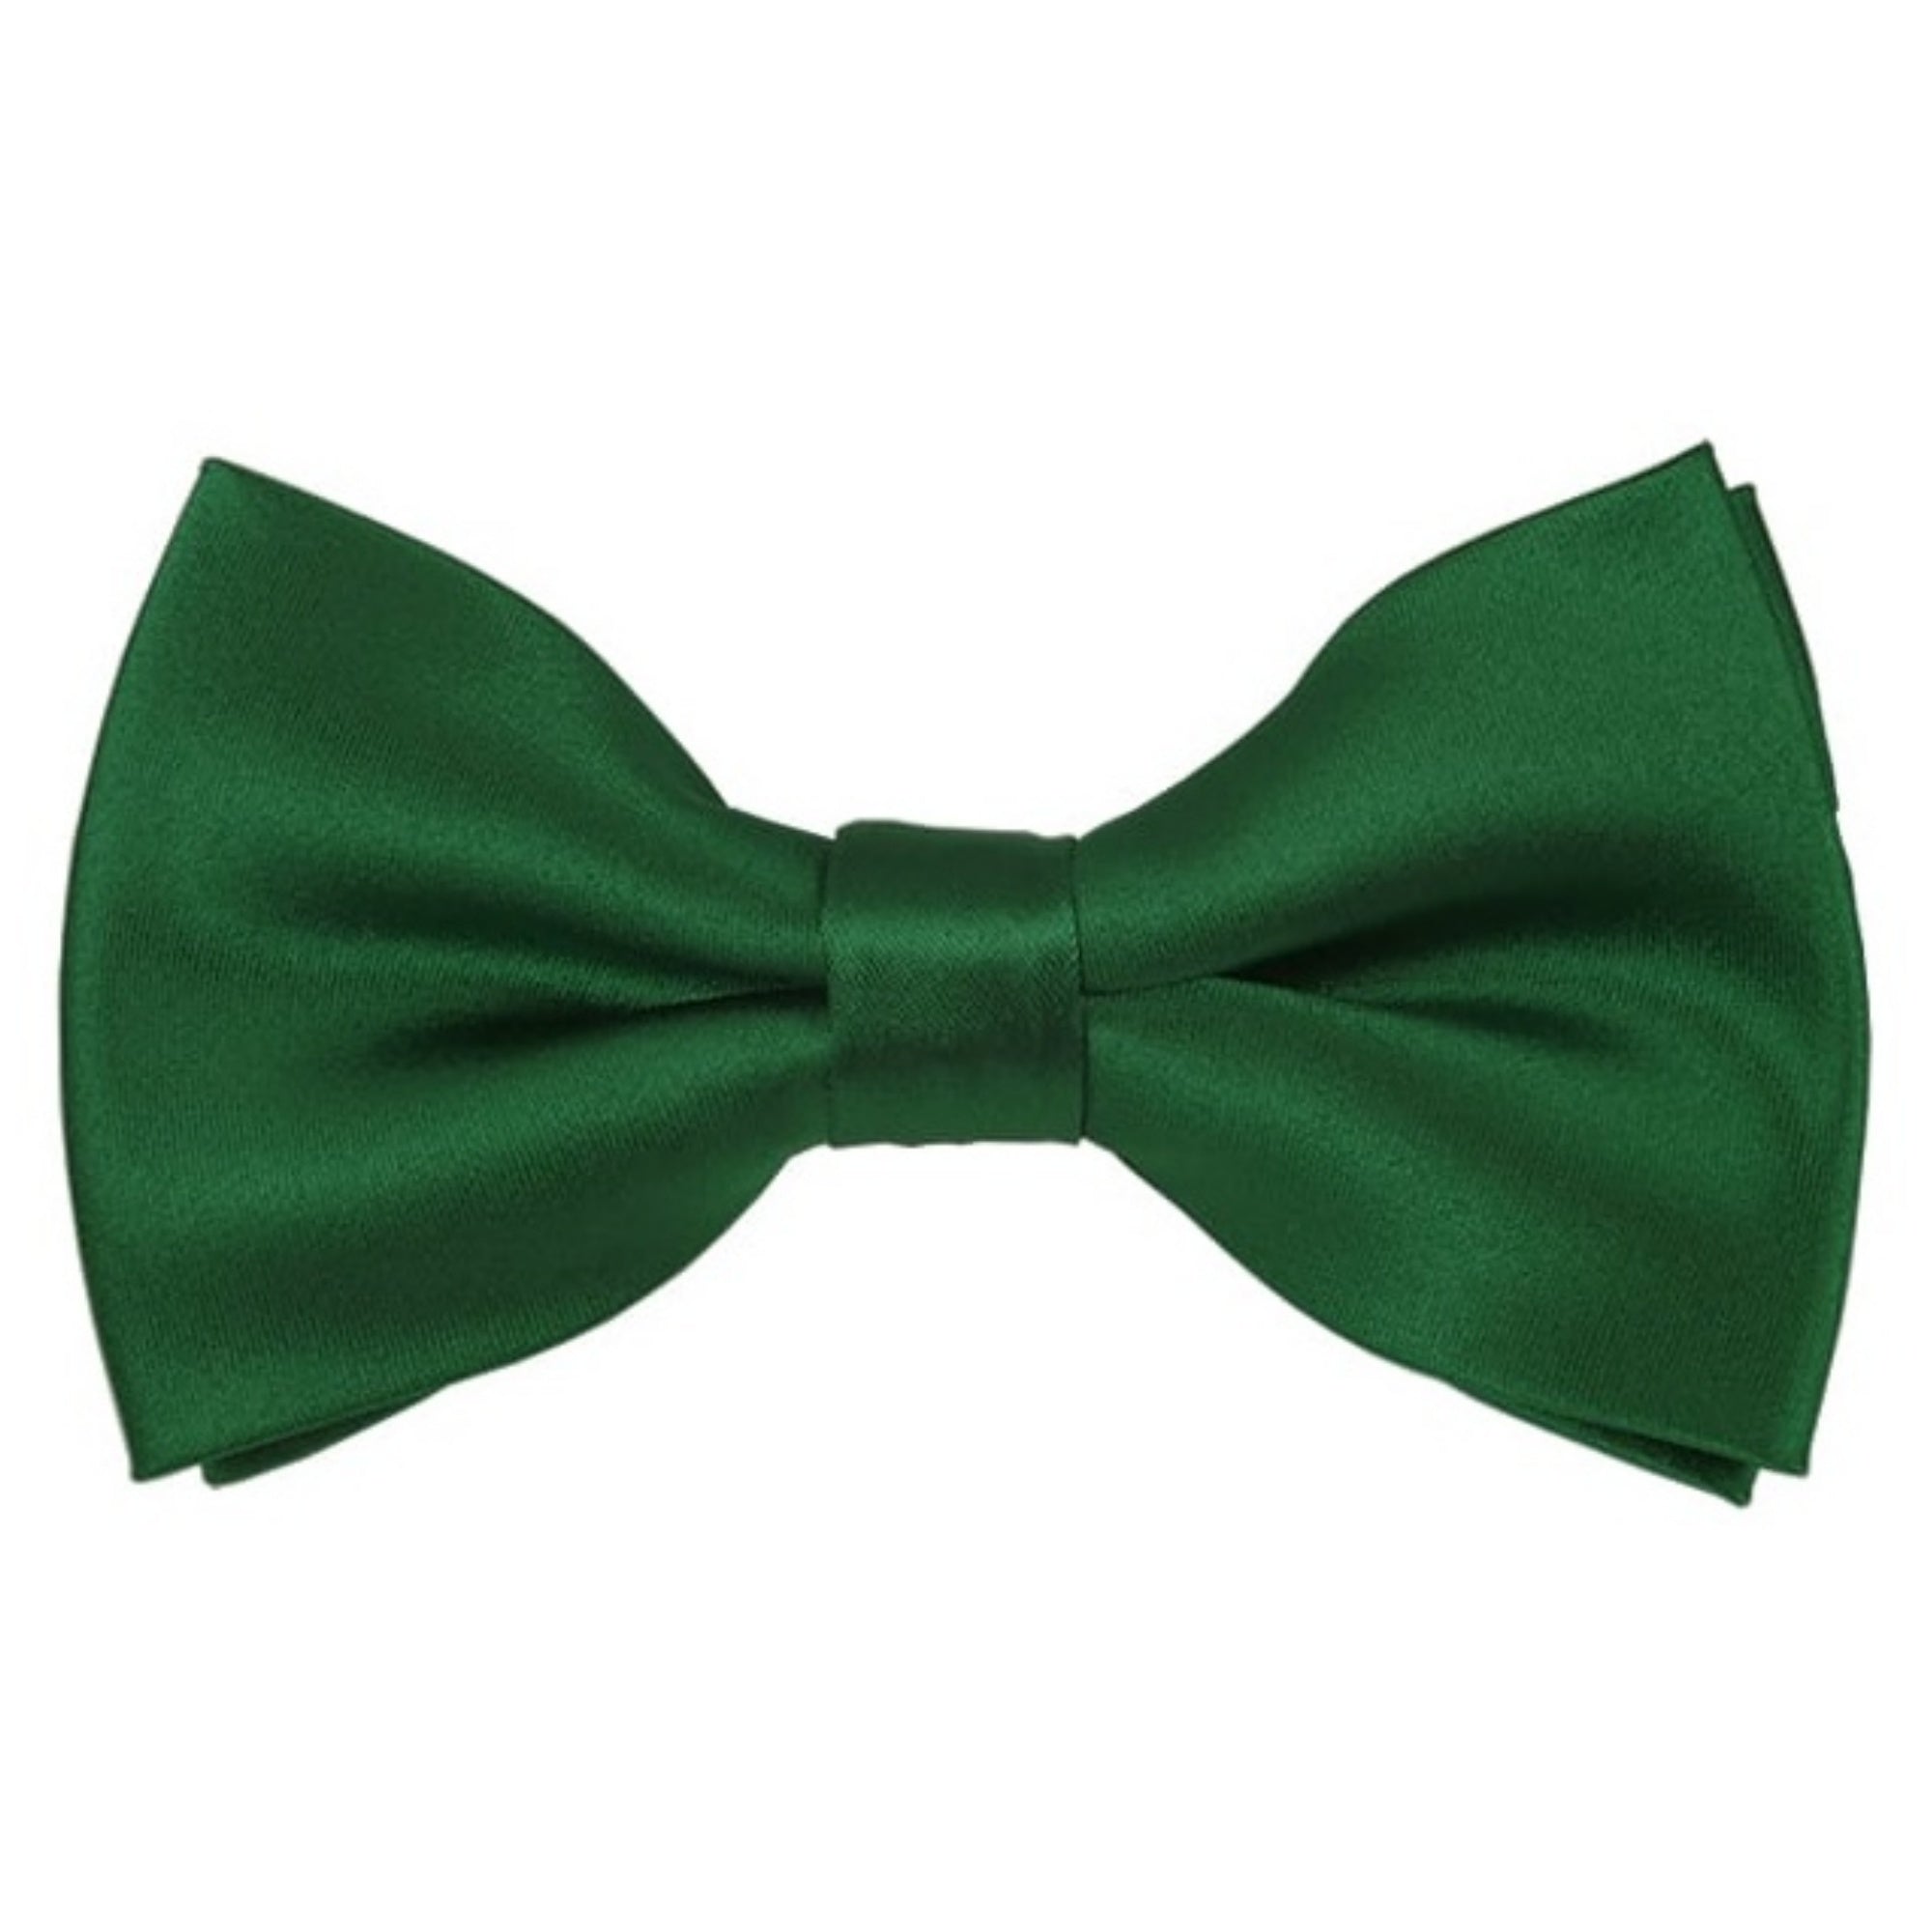 TheDapperTie Men's Solid Color 2.5 W And 4.5 L Inch Pre-Tied adjustable Bow Ties Men's Solid Color Bow Tie TheDapperTie Kelly Green  